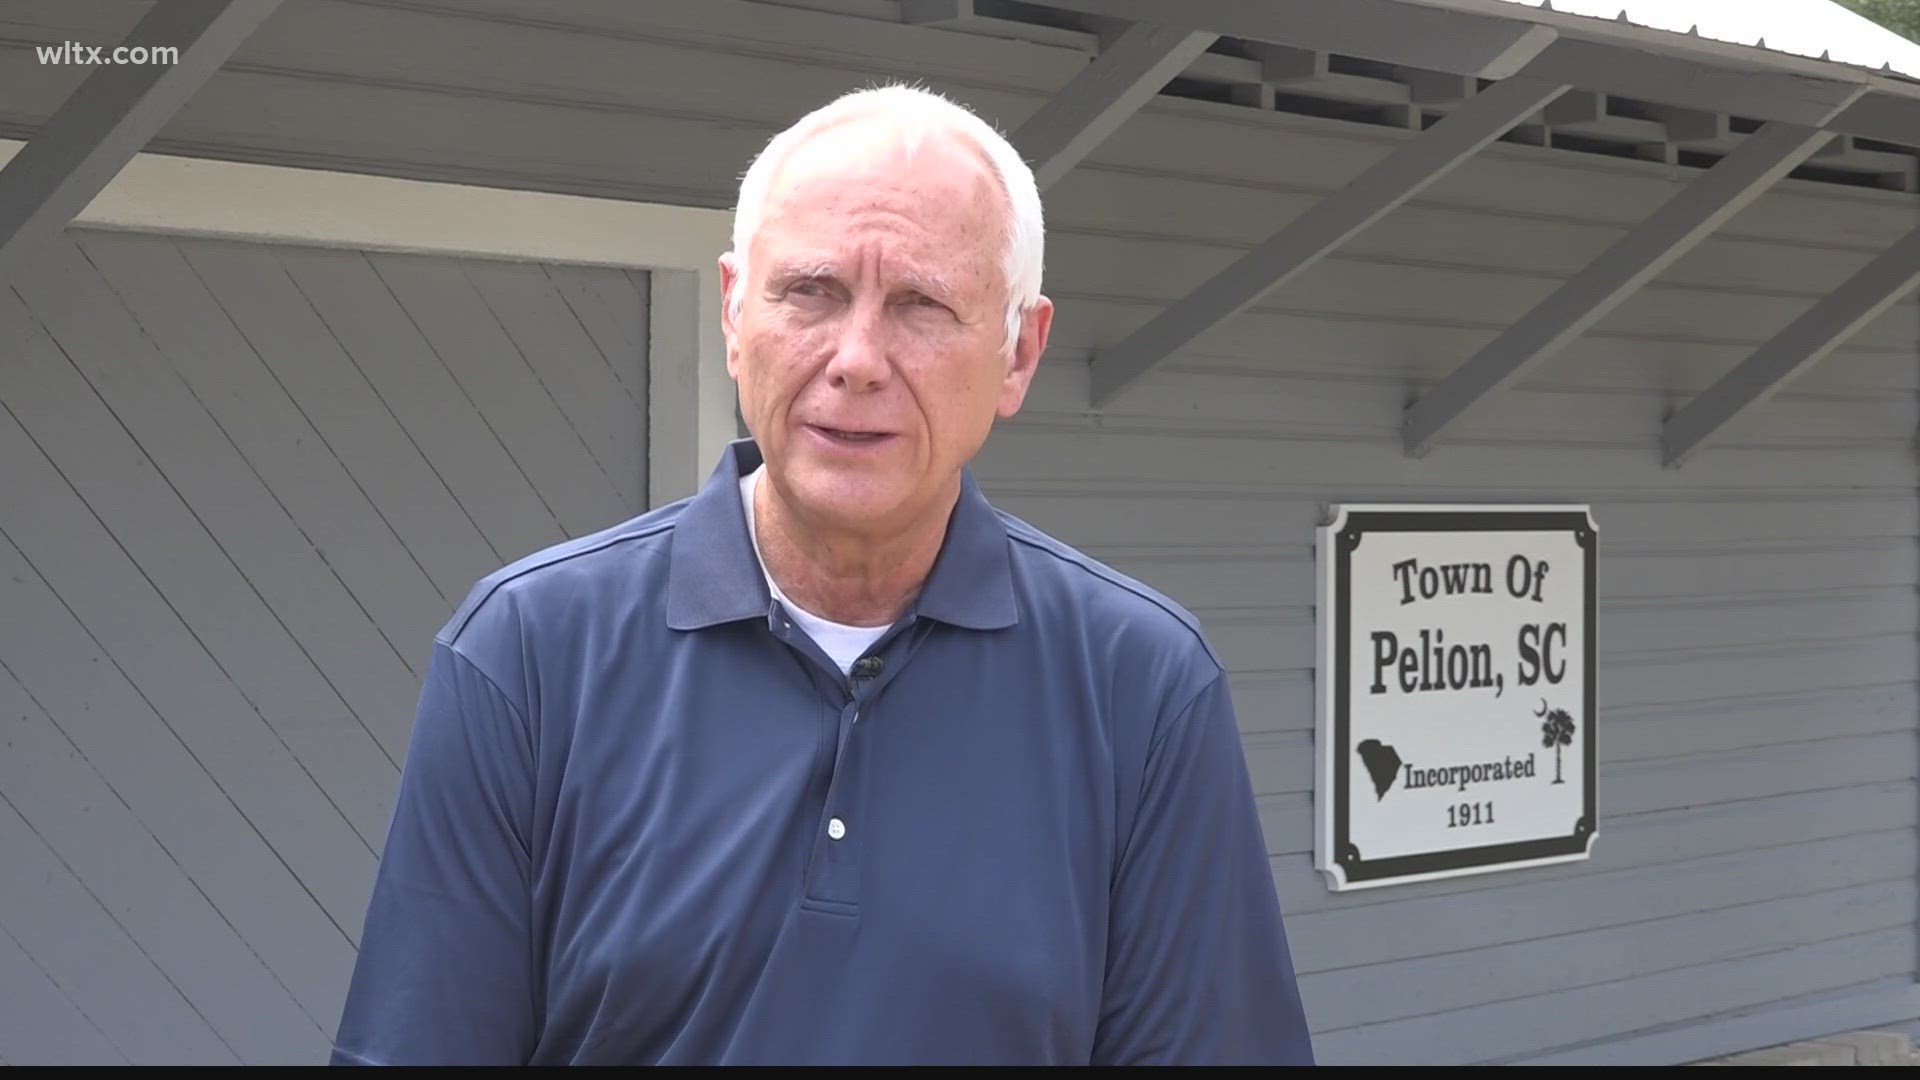 New housing developments are on the way to the Lexington County town of Pelion, and according to town leaders, these new homes could double the town's population.